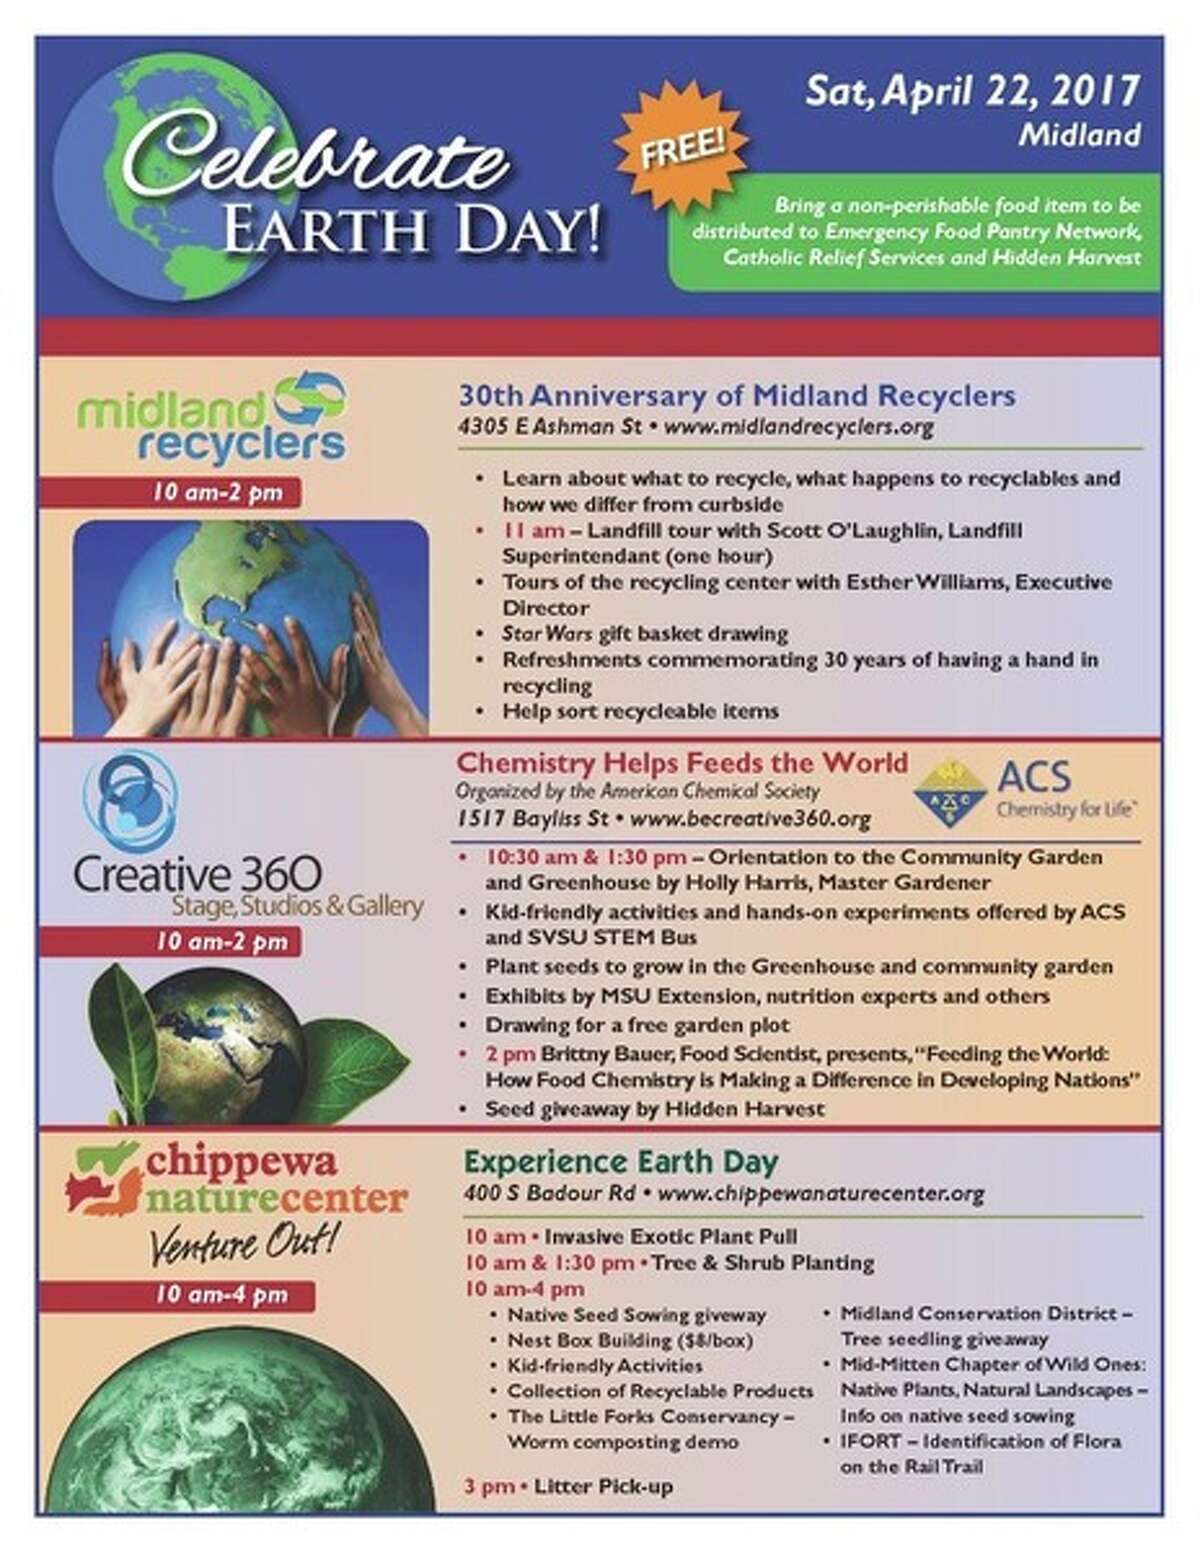 A flyer showing Earth Day events at three locations in Midland on Saturday, April 22.